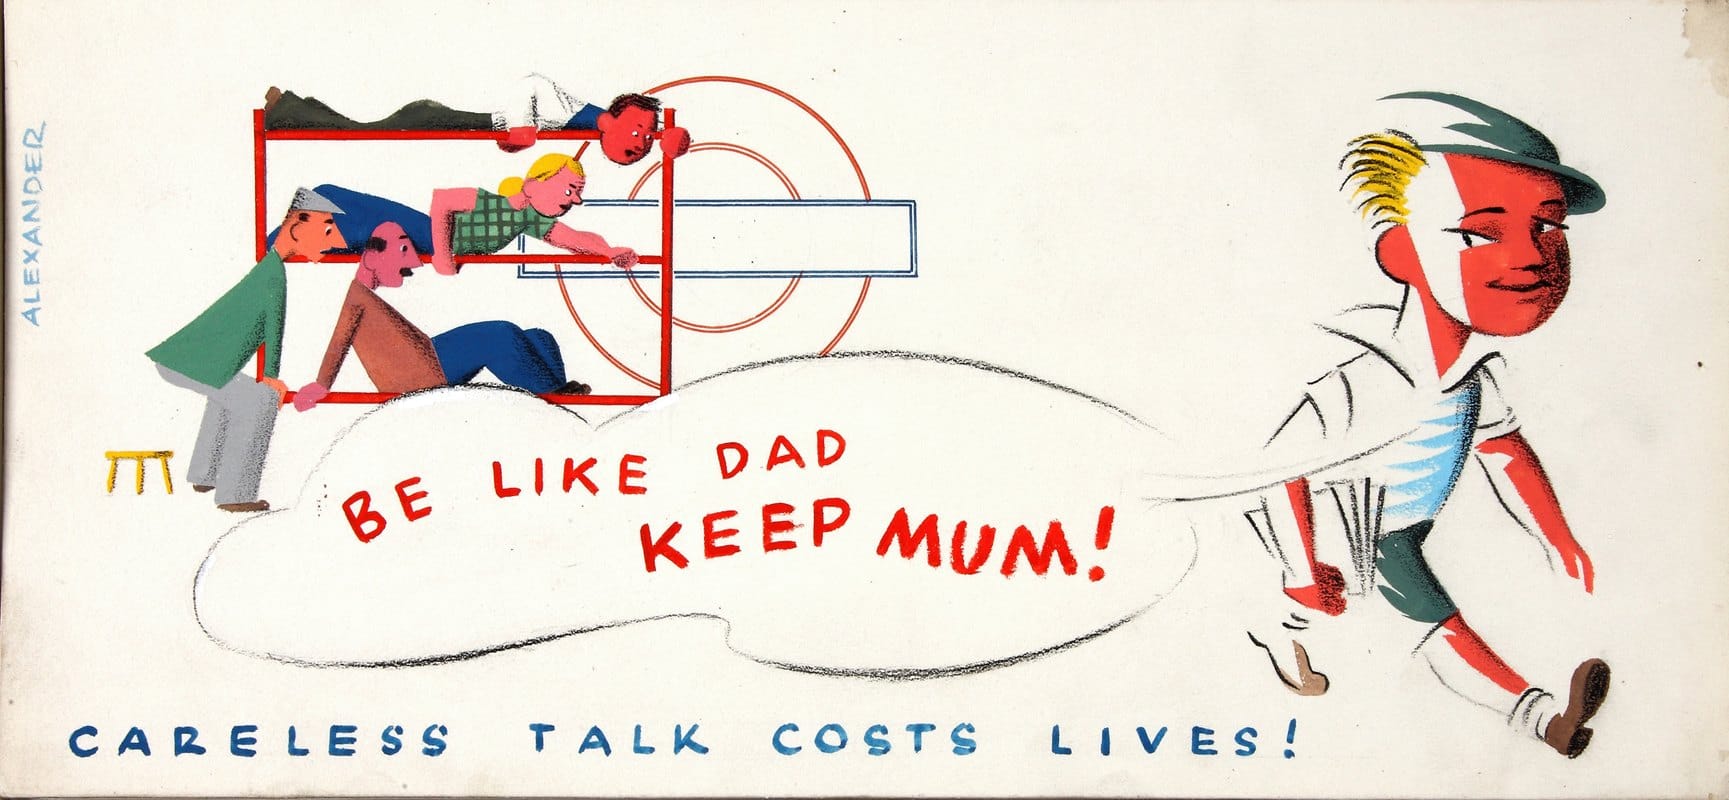 Anonymous - Be like Dad keep mum! Careless talk costs lives!